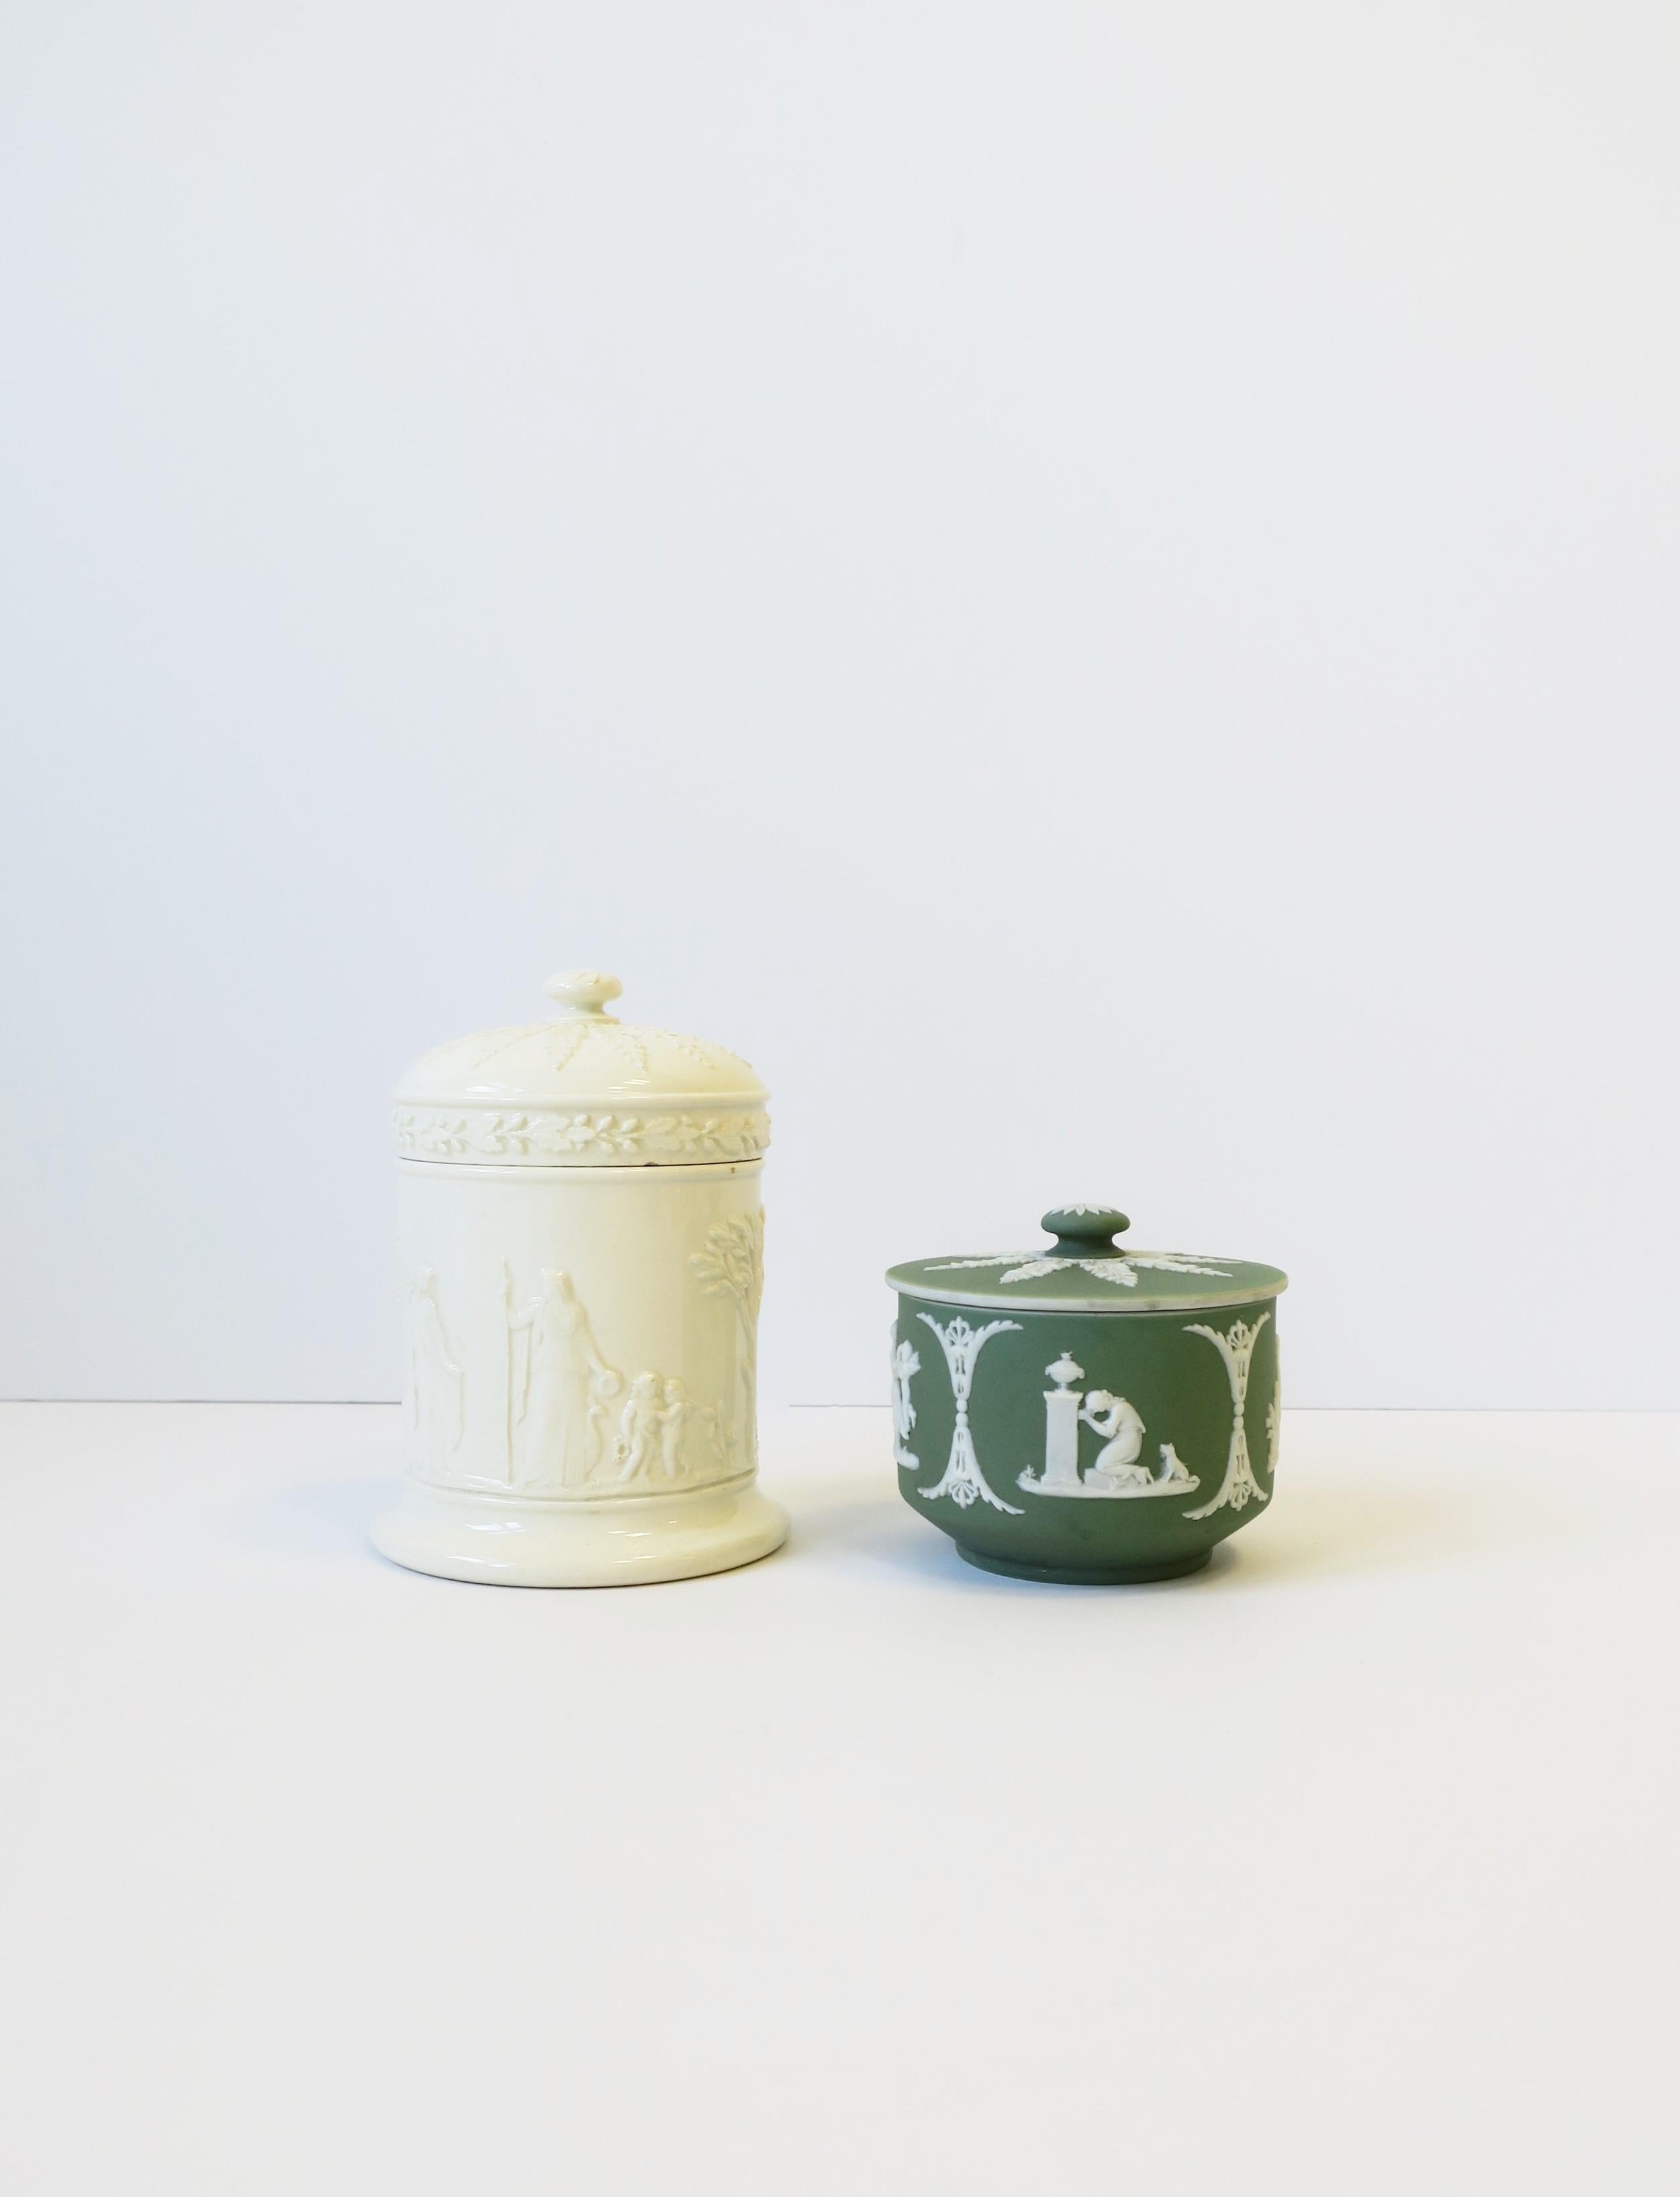 20th Century English Wedgwood Neoclassical White Box Jar with Lid